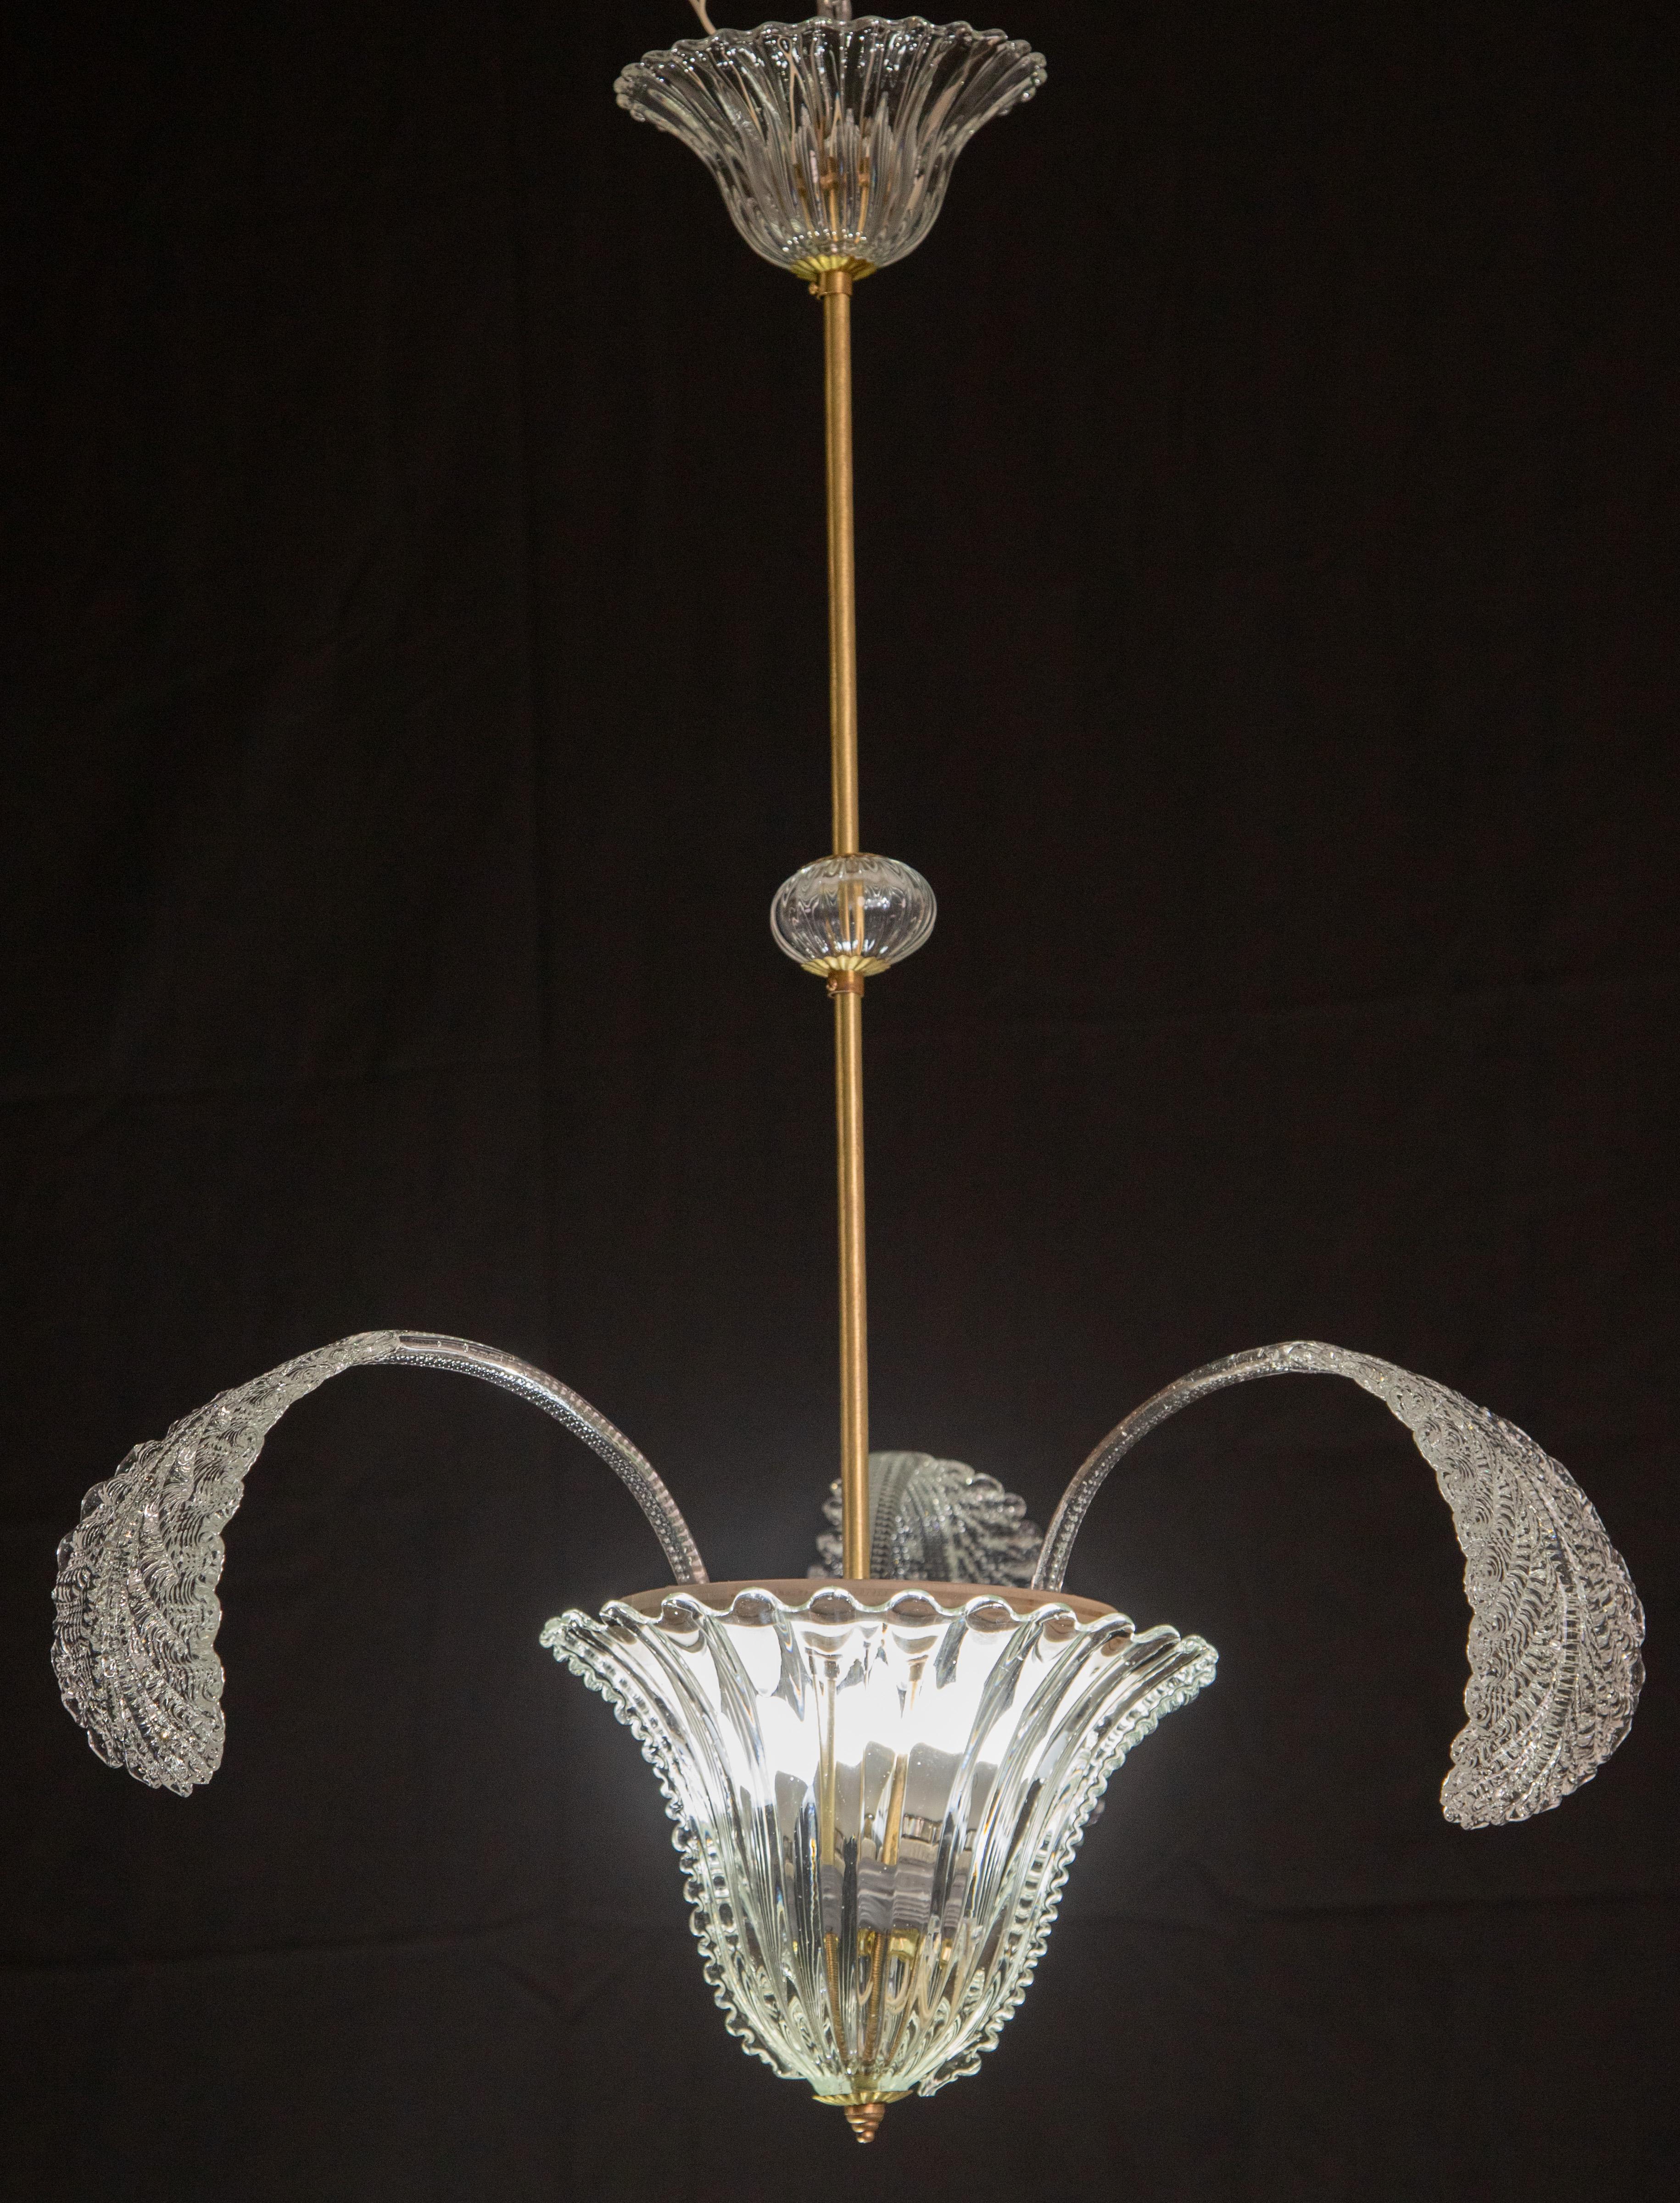 Pretty Murano chandelier attributed to Ercole Barovier special for decorating any kind of space.

The chandelier consists of 3 leaves and a glass element base plus 2 other glass.

The chandelier measures 80 centimeters in height and 50 in